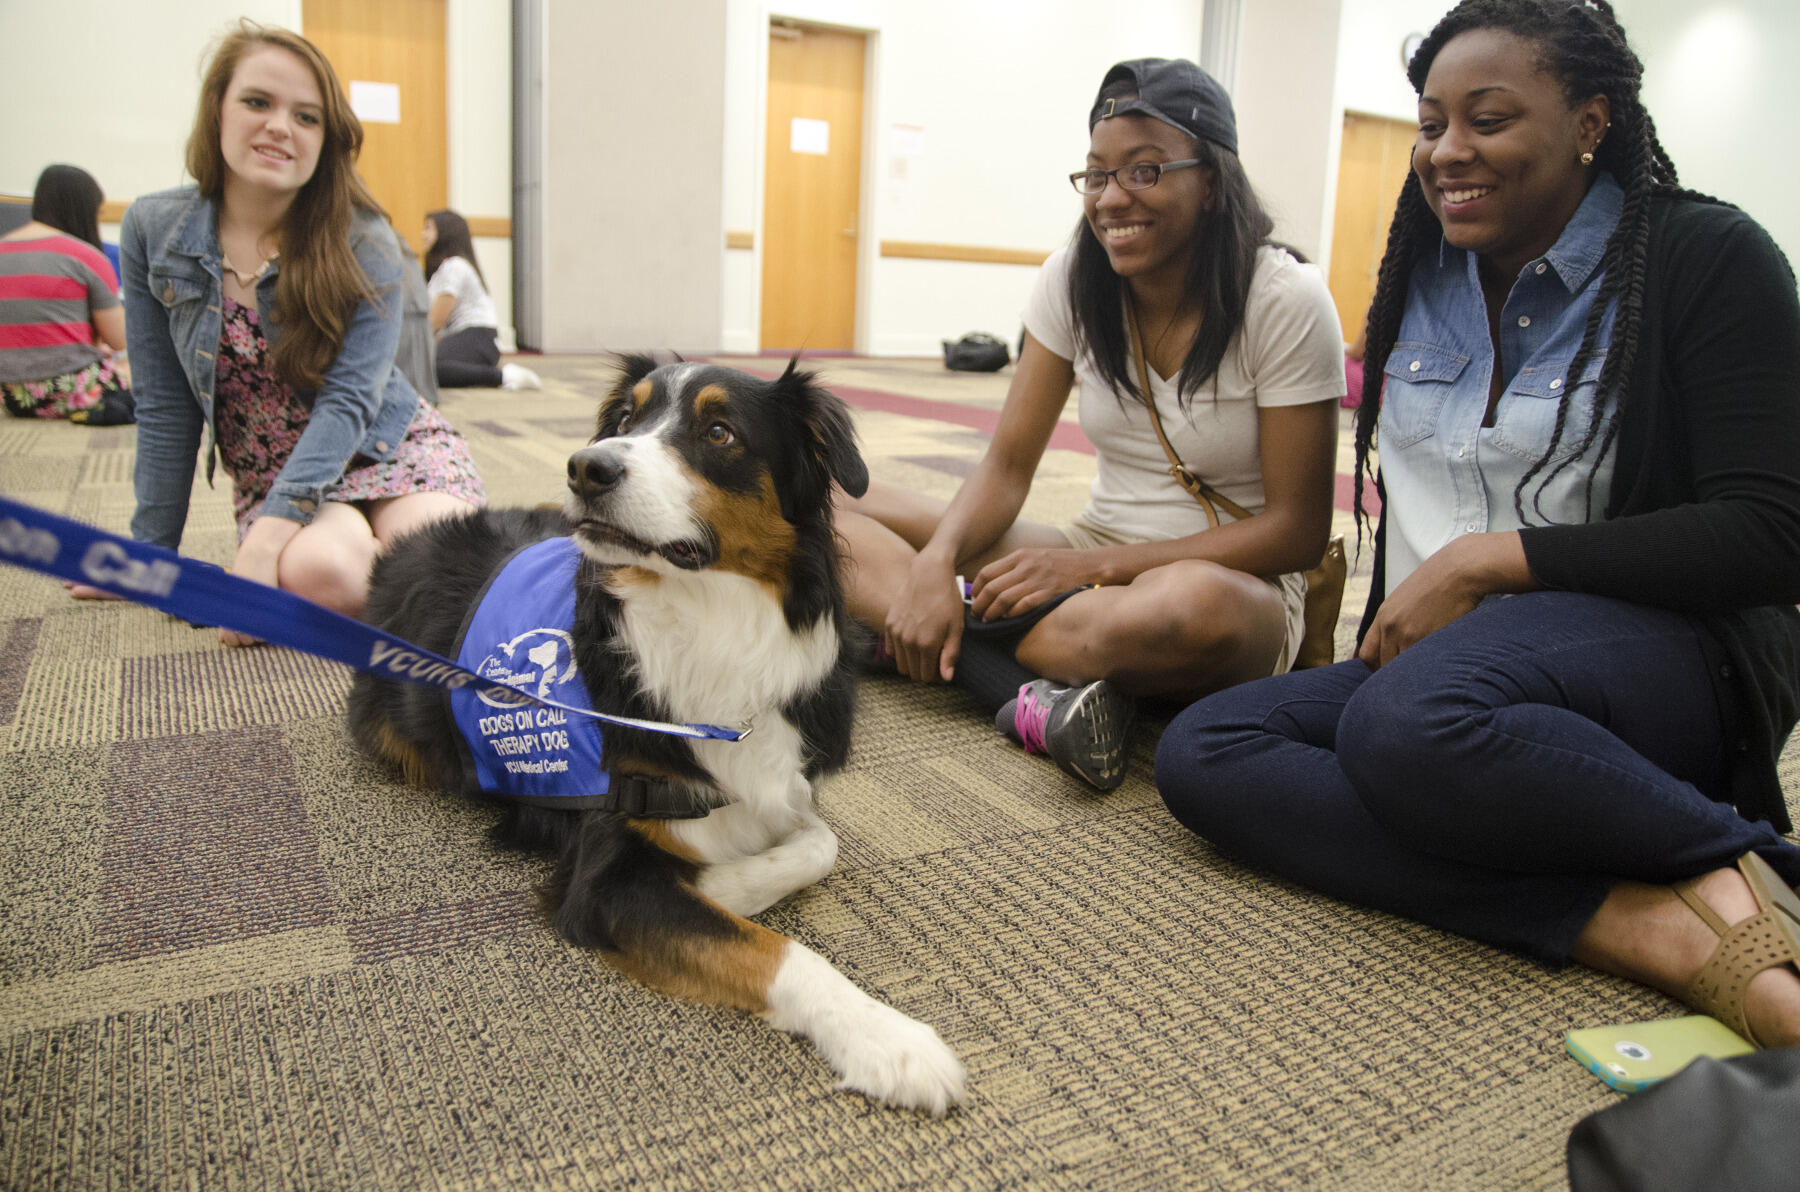 During exam season this spring, students will have the chance not only to relive stress by spending time with dogs but also with fish during the first Fins for Finals event.